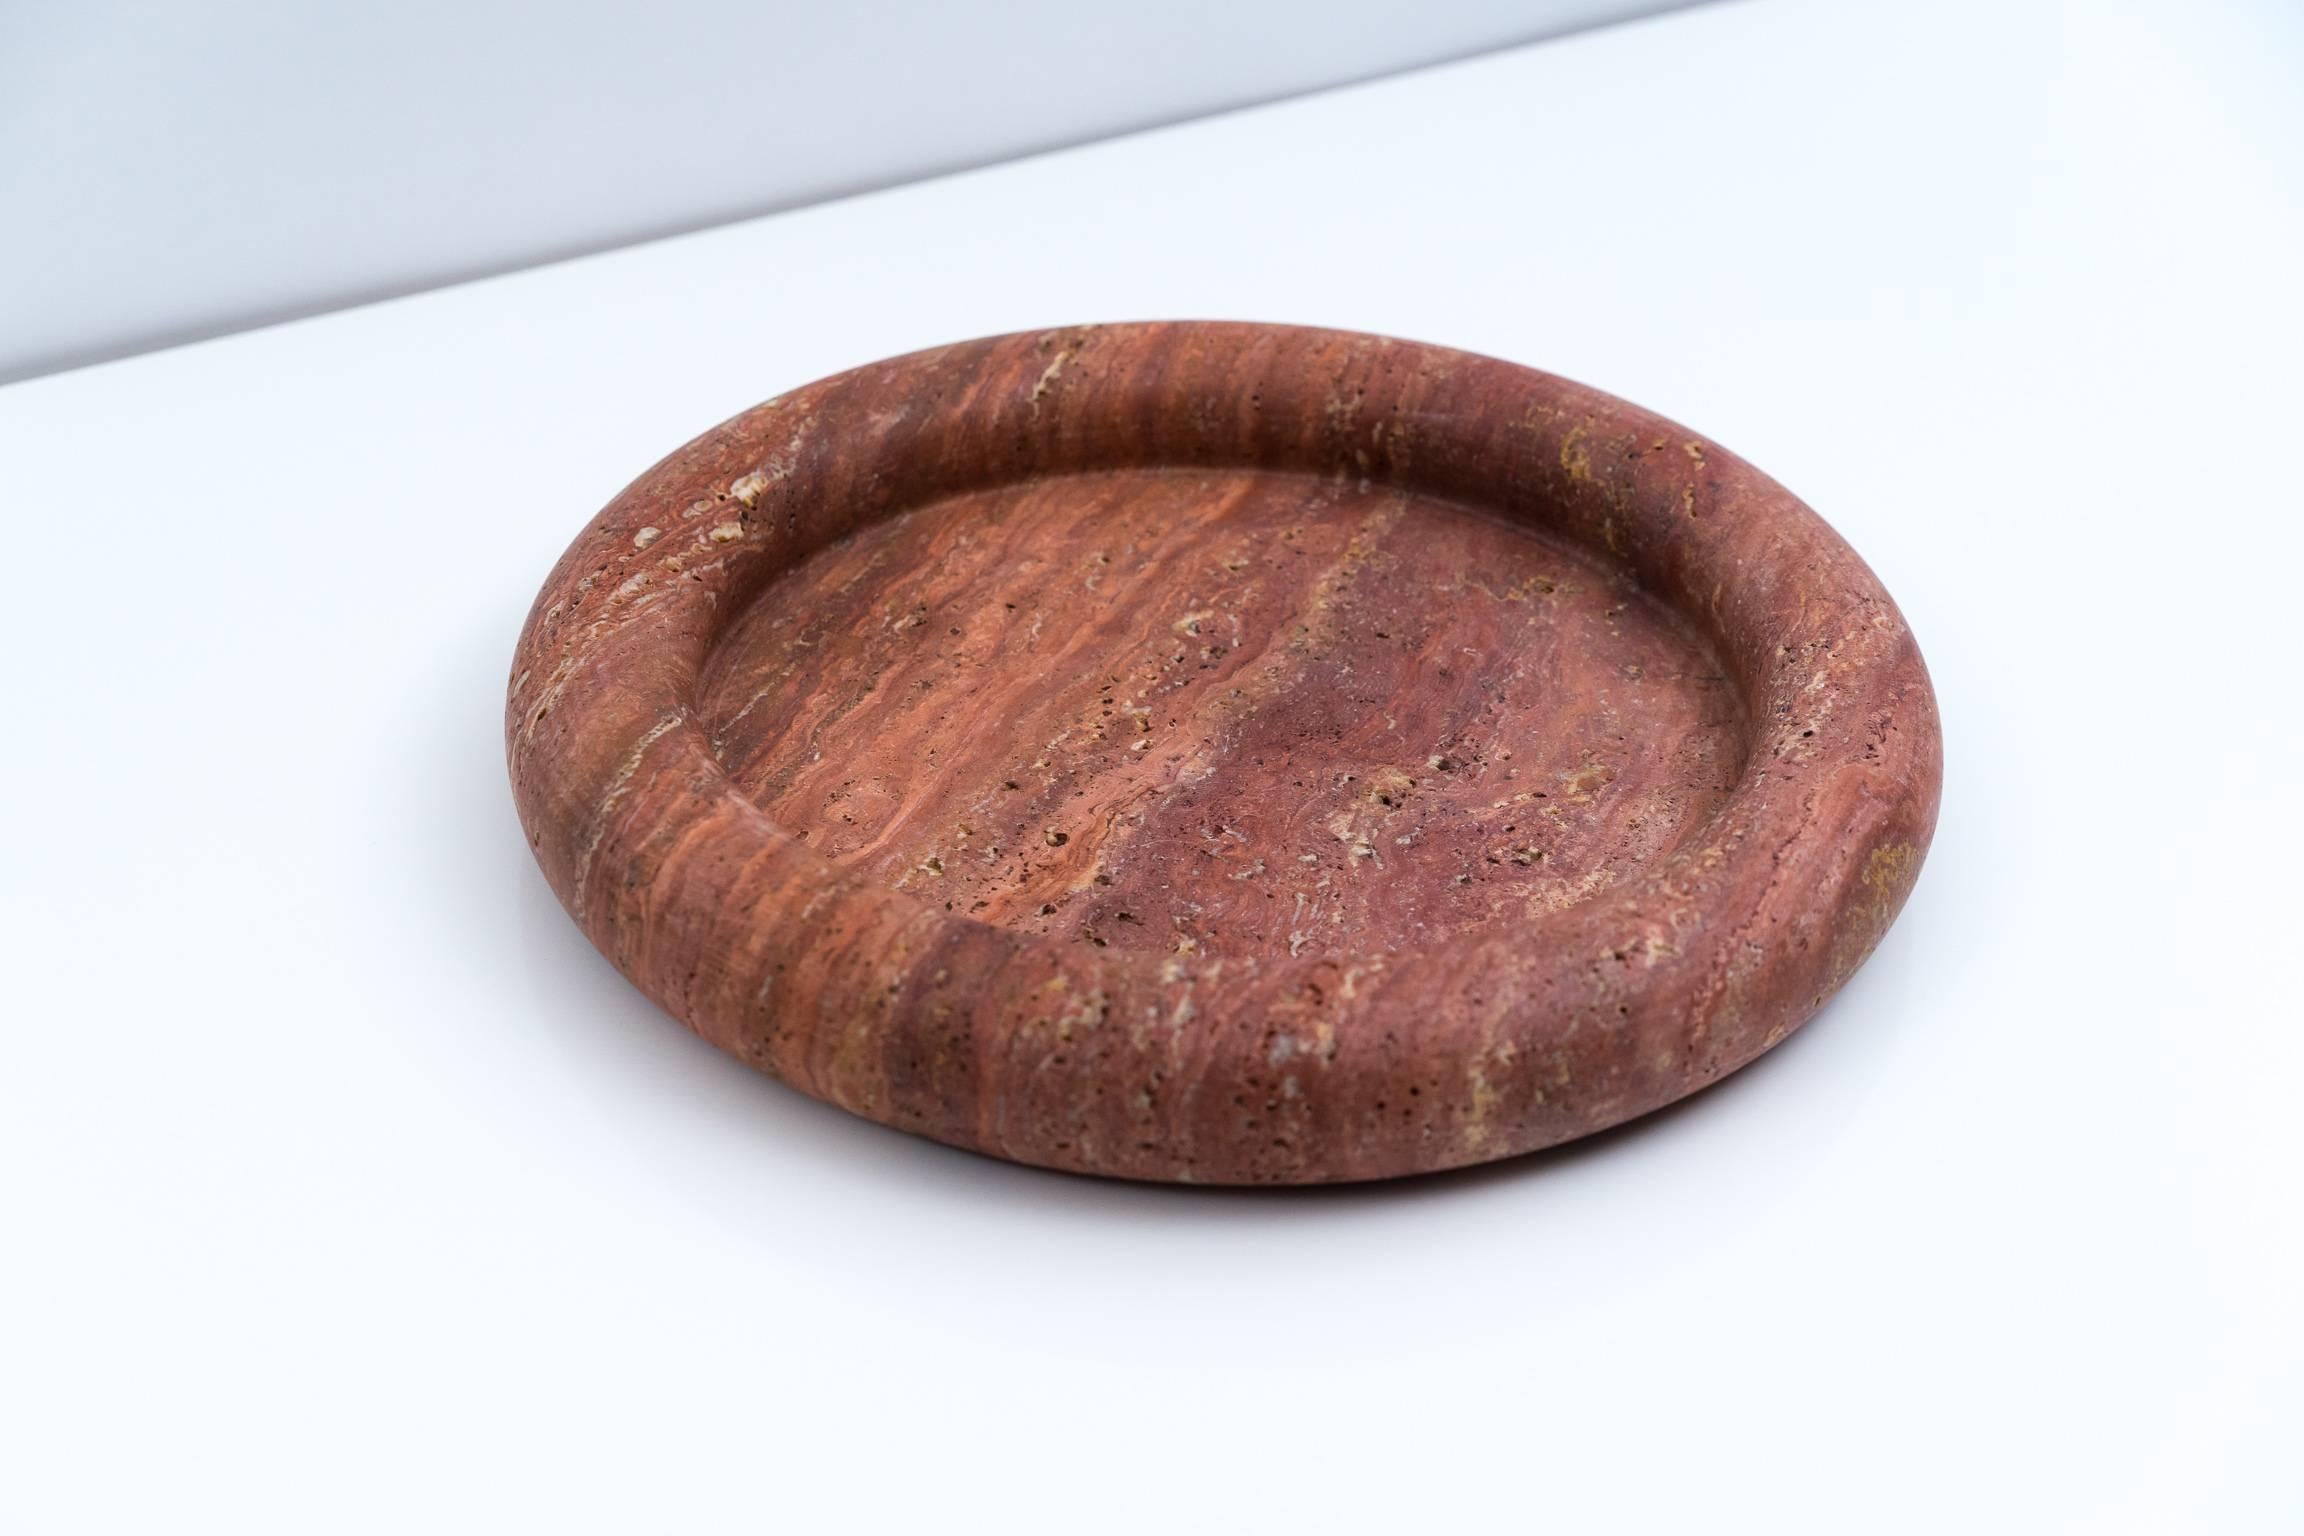 Large low-rimmed Rosa di Persia travertine dish by Egidio Di Rosa and Pier Alessandro Giusti for Up&Up from the early 1970s. The beautifully veined pink-red travertine dish is almost a foot in a diameter, giving it a strong presence on any